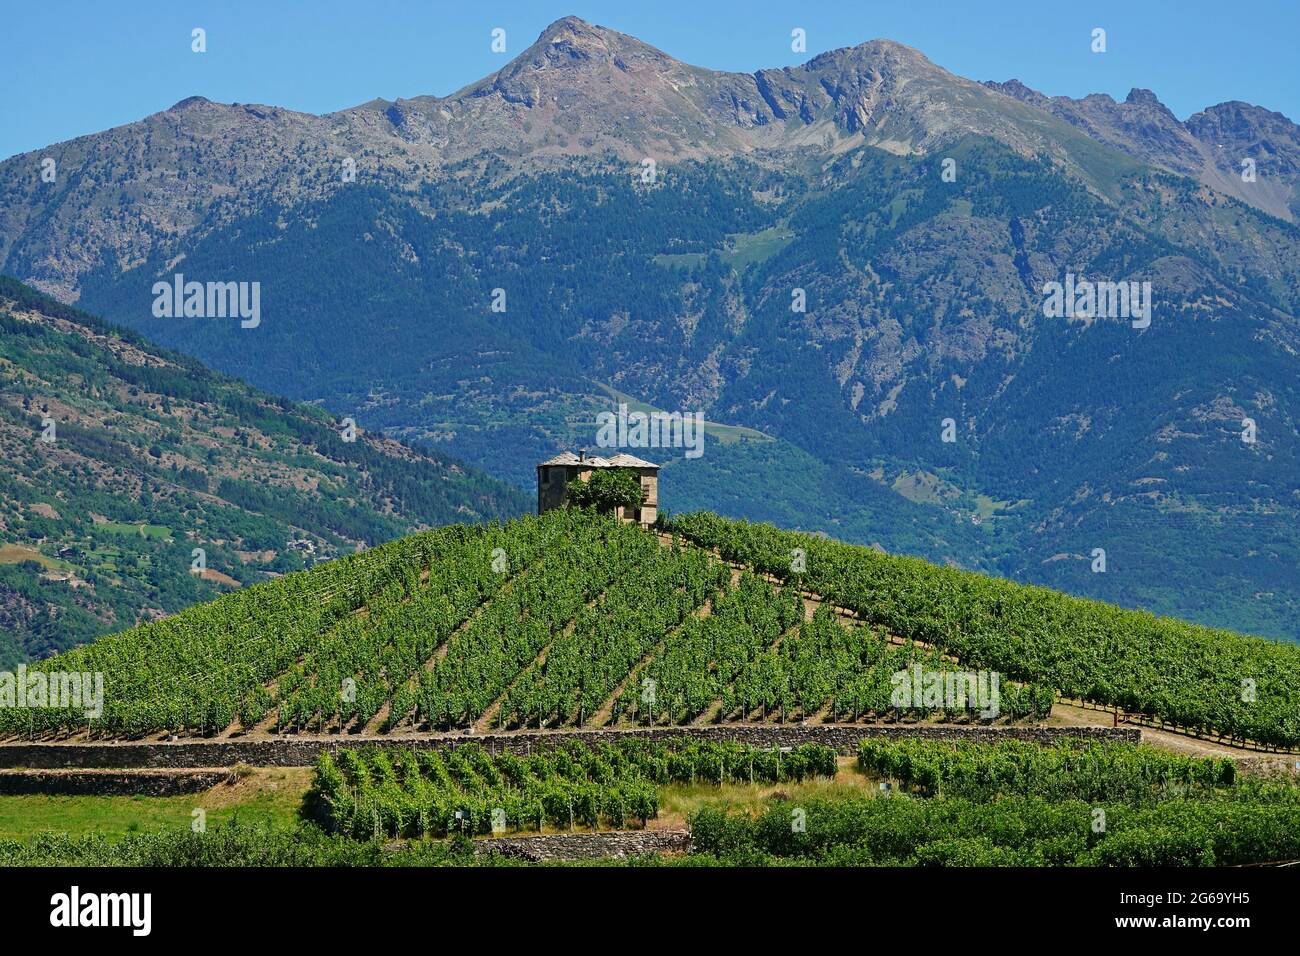 The vineyard 'Les Crêtes' of Aymavilles in the mountain territory of Valle d'Aosta Stock Photo